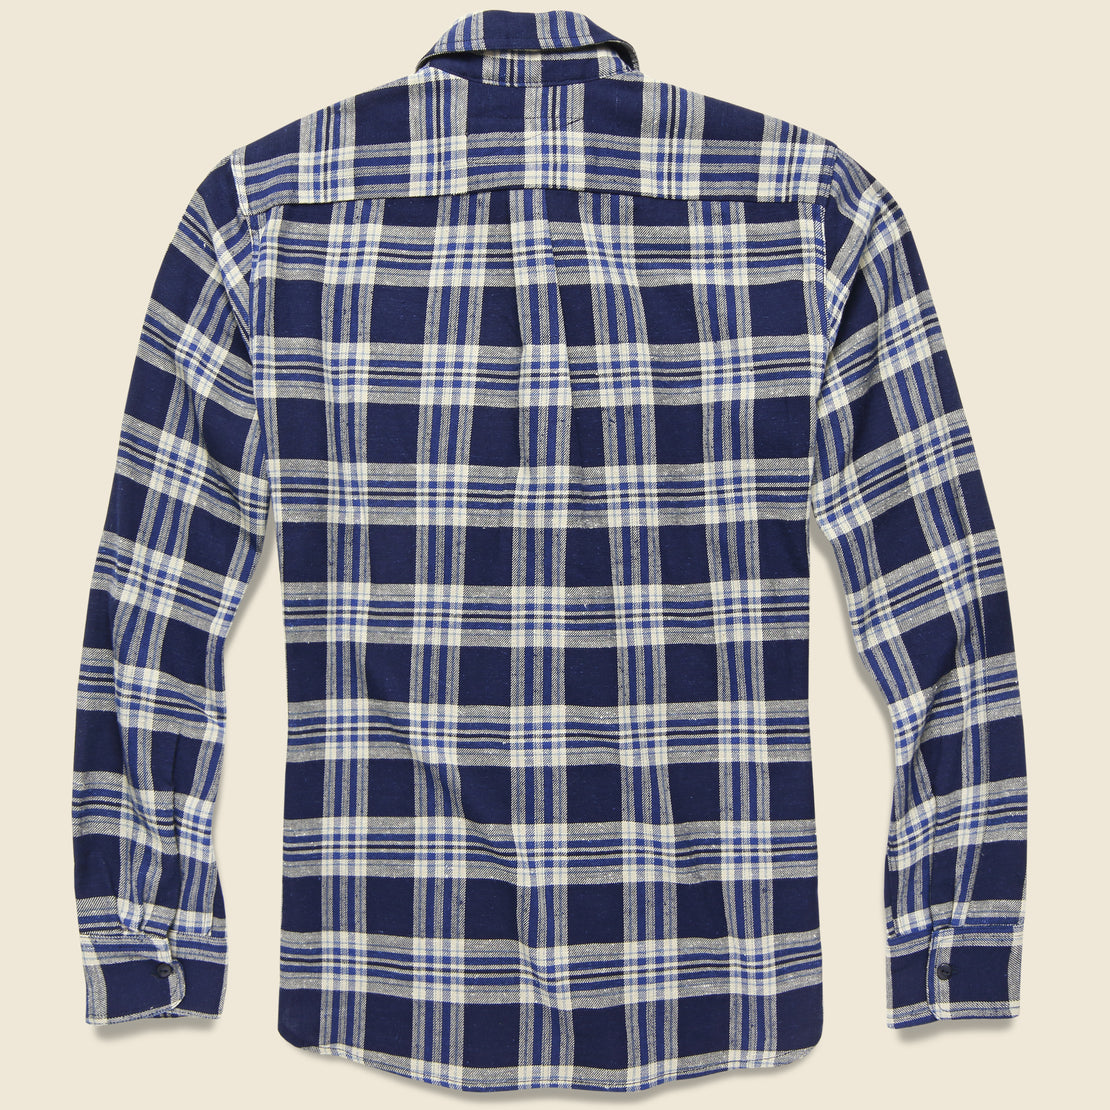 Traveler Shirt - Navy Plaid - Rogue Territory - STAG Provisions - Tops - L/S Woven - Plaid